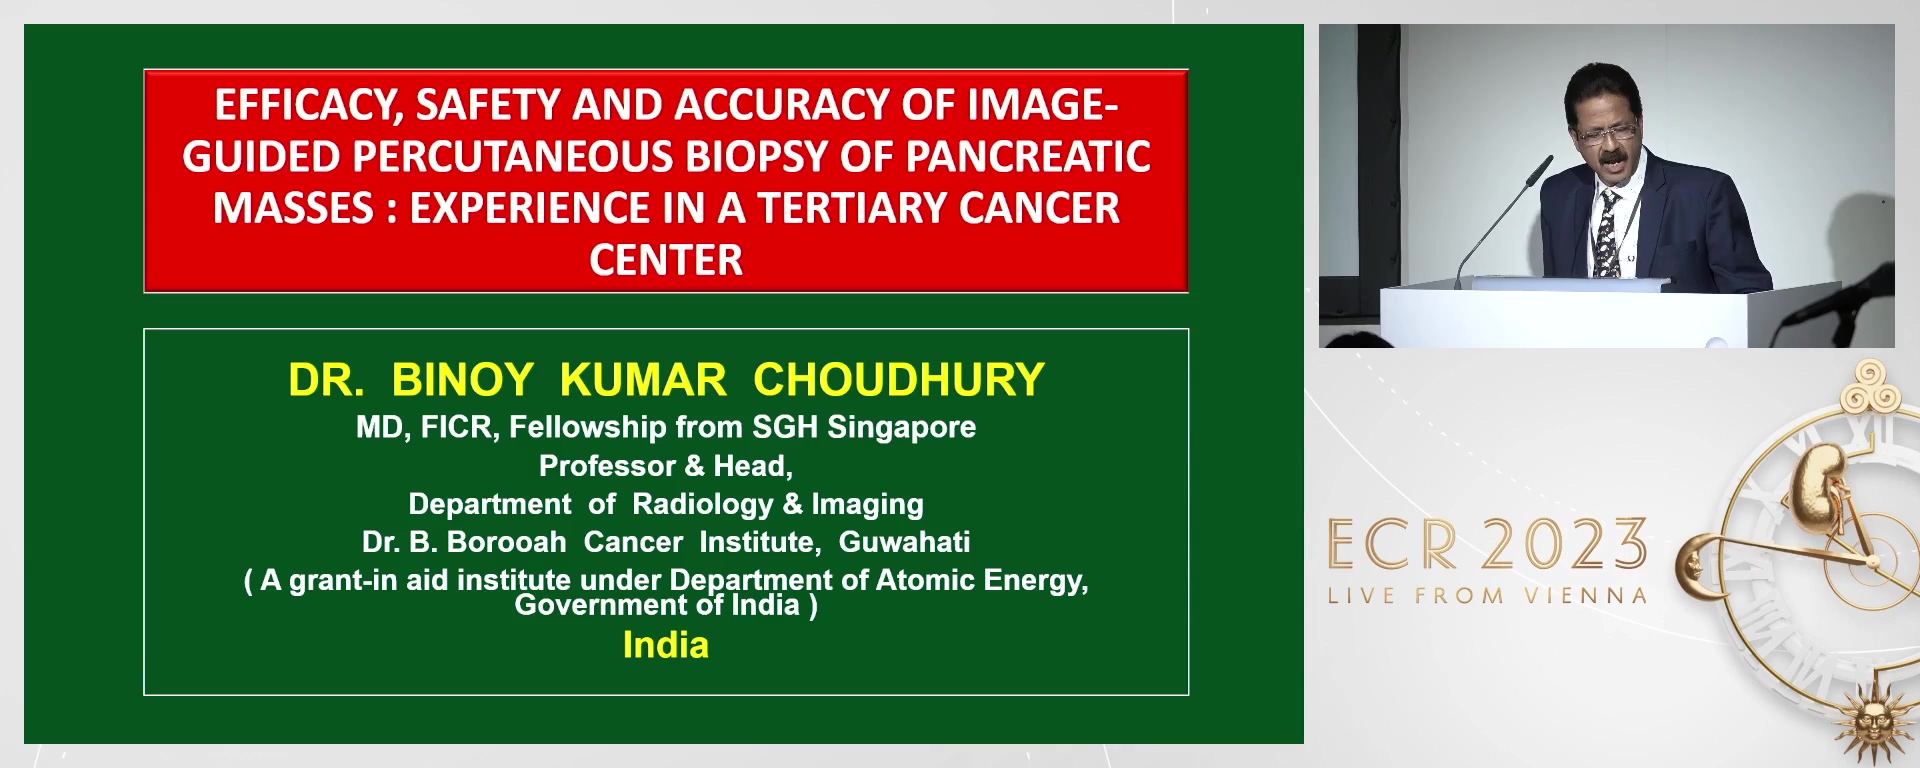 Efficacy, safety and accuracy of Image-guided percutaneous biopsy of pancreatic masses: experience in a tertiary cancer centre